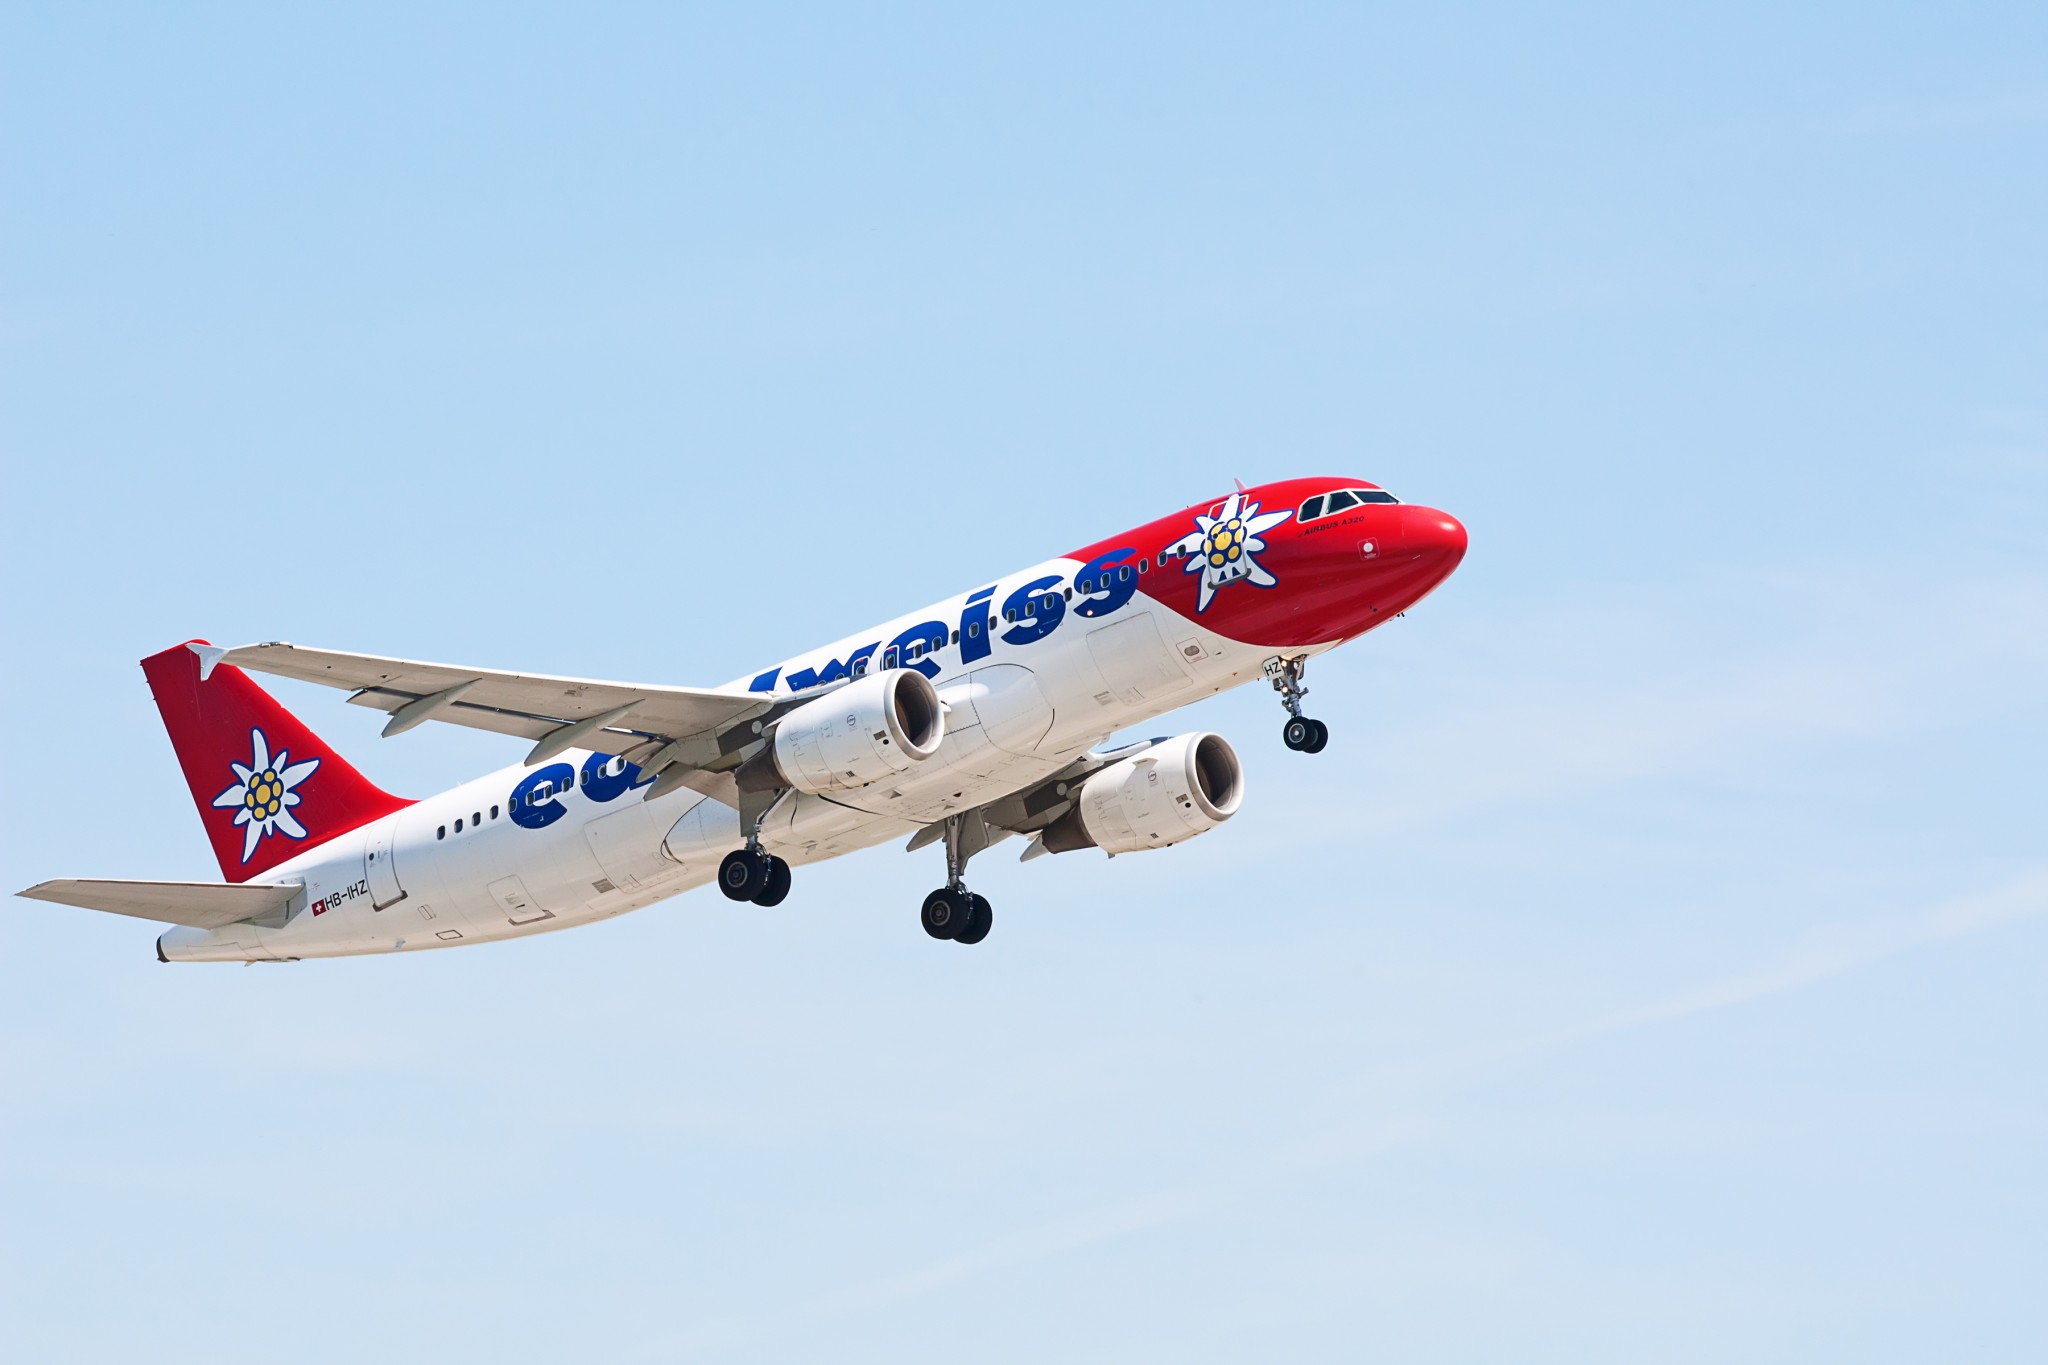 Edelweiss connects Zurich to two Jordanian destinations